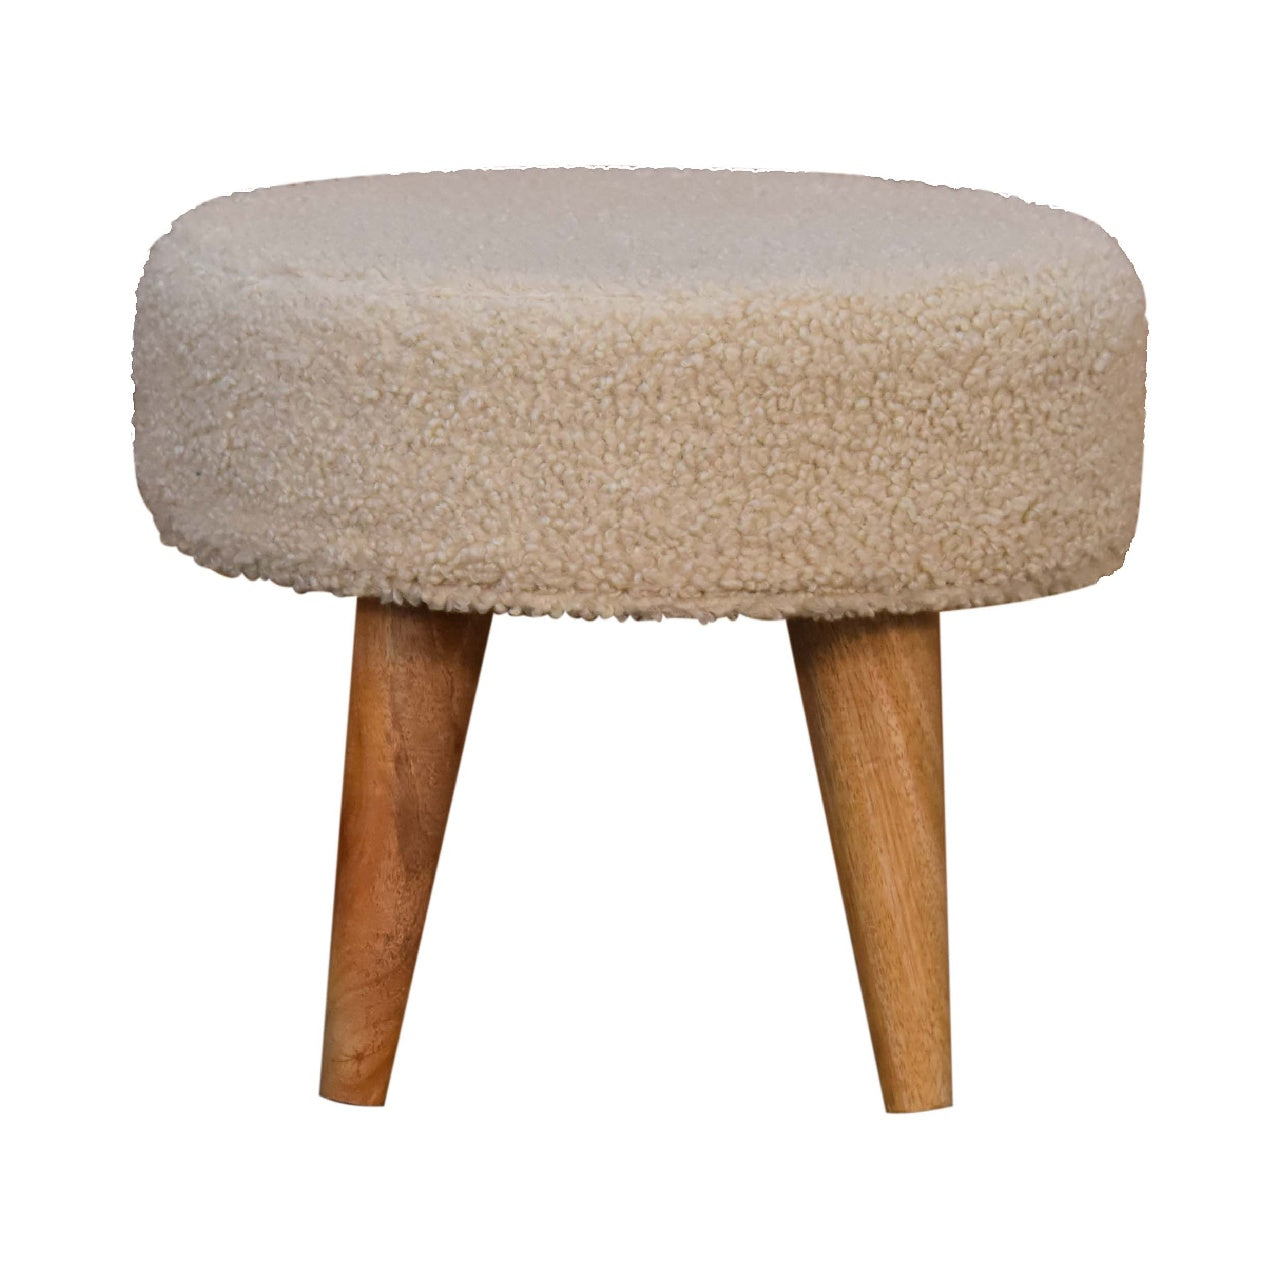 View Cream Boucle Petite Footstool information